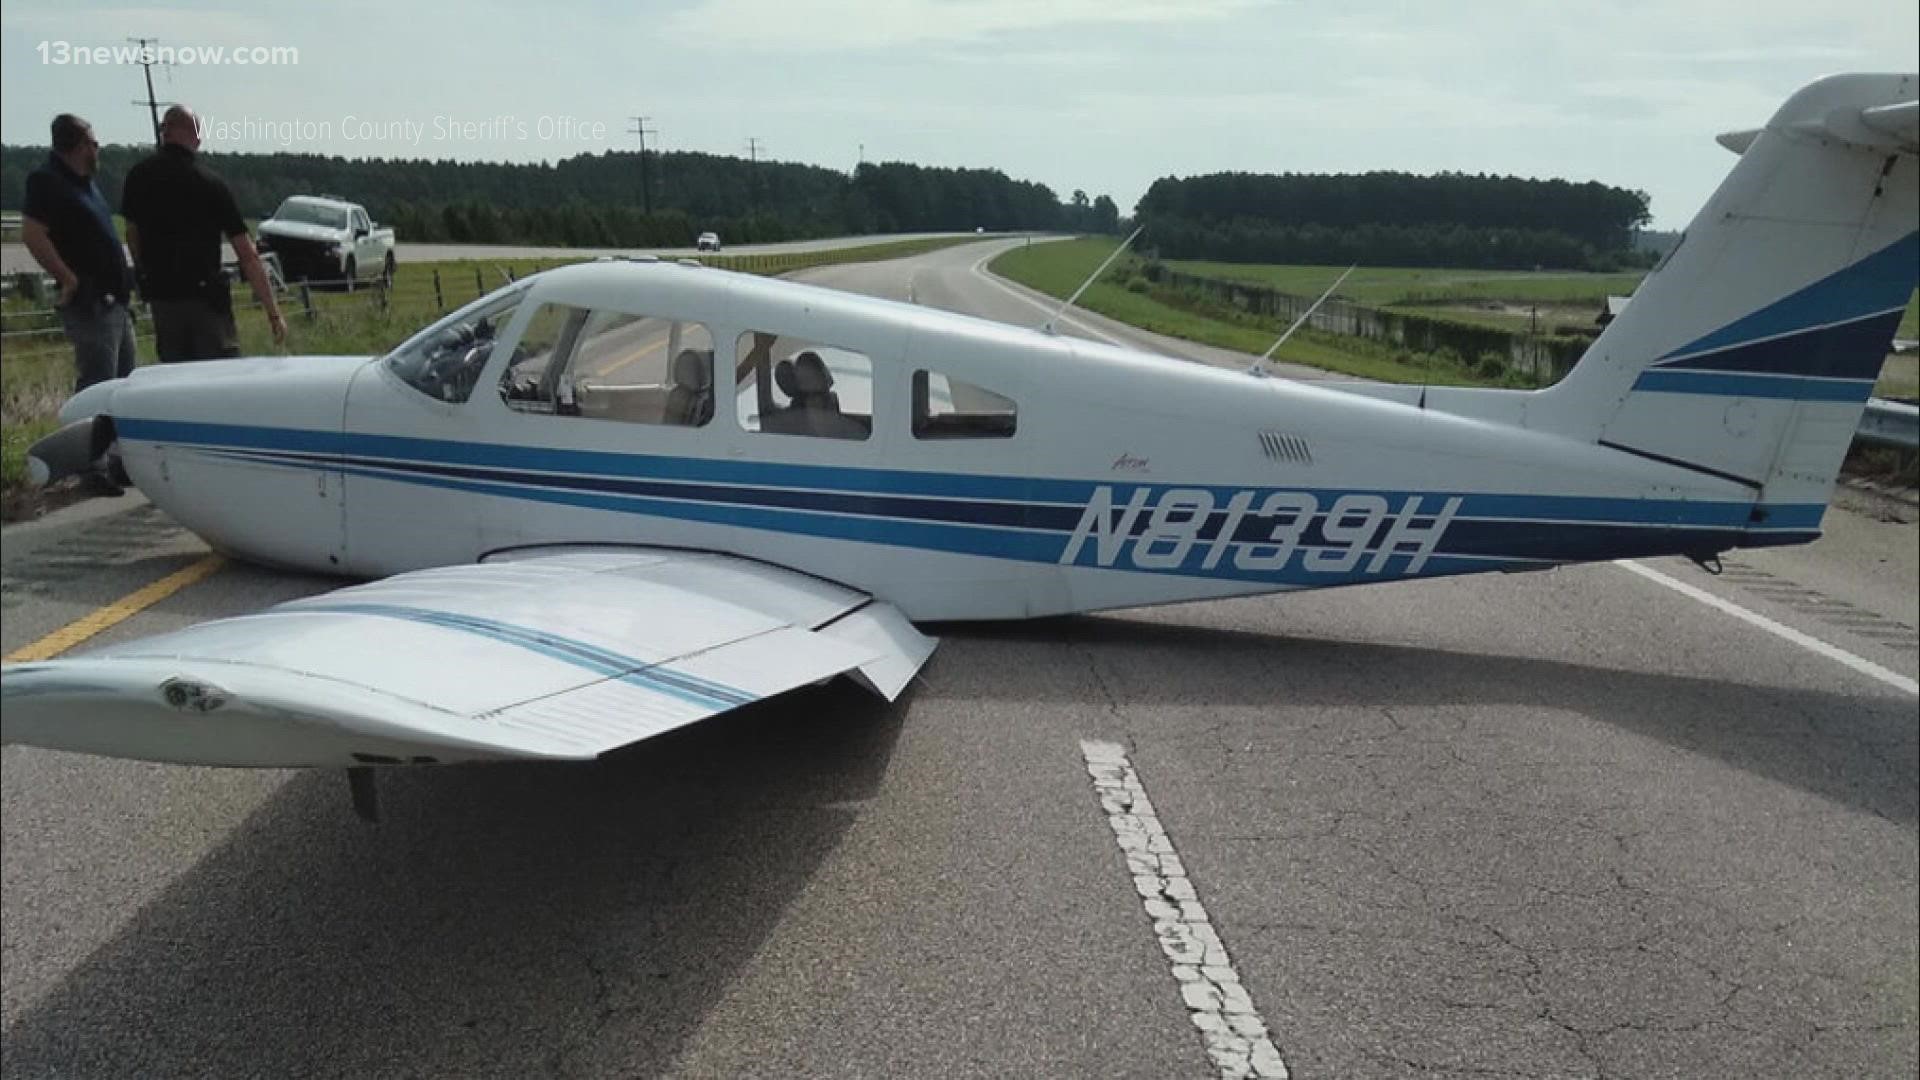 A pilot going from Dare County to Plymouth, N.C. experienced a loss of power and had to make a belly landing on Highway 64 near Creswell. The pilot was unhurt.